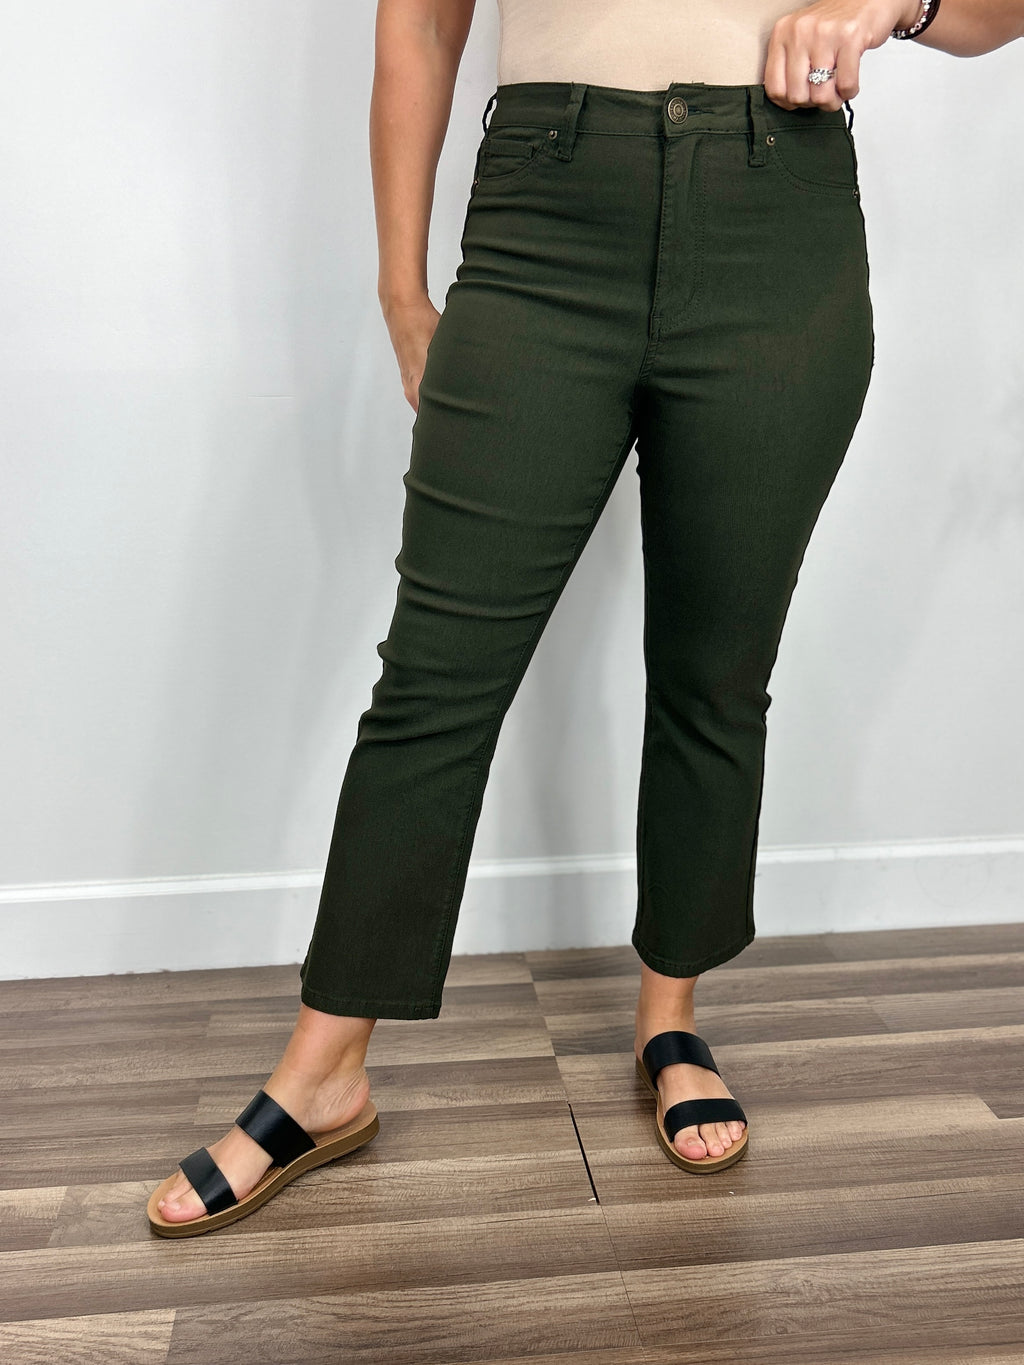 Women's cropped stretchy pants in olive 